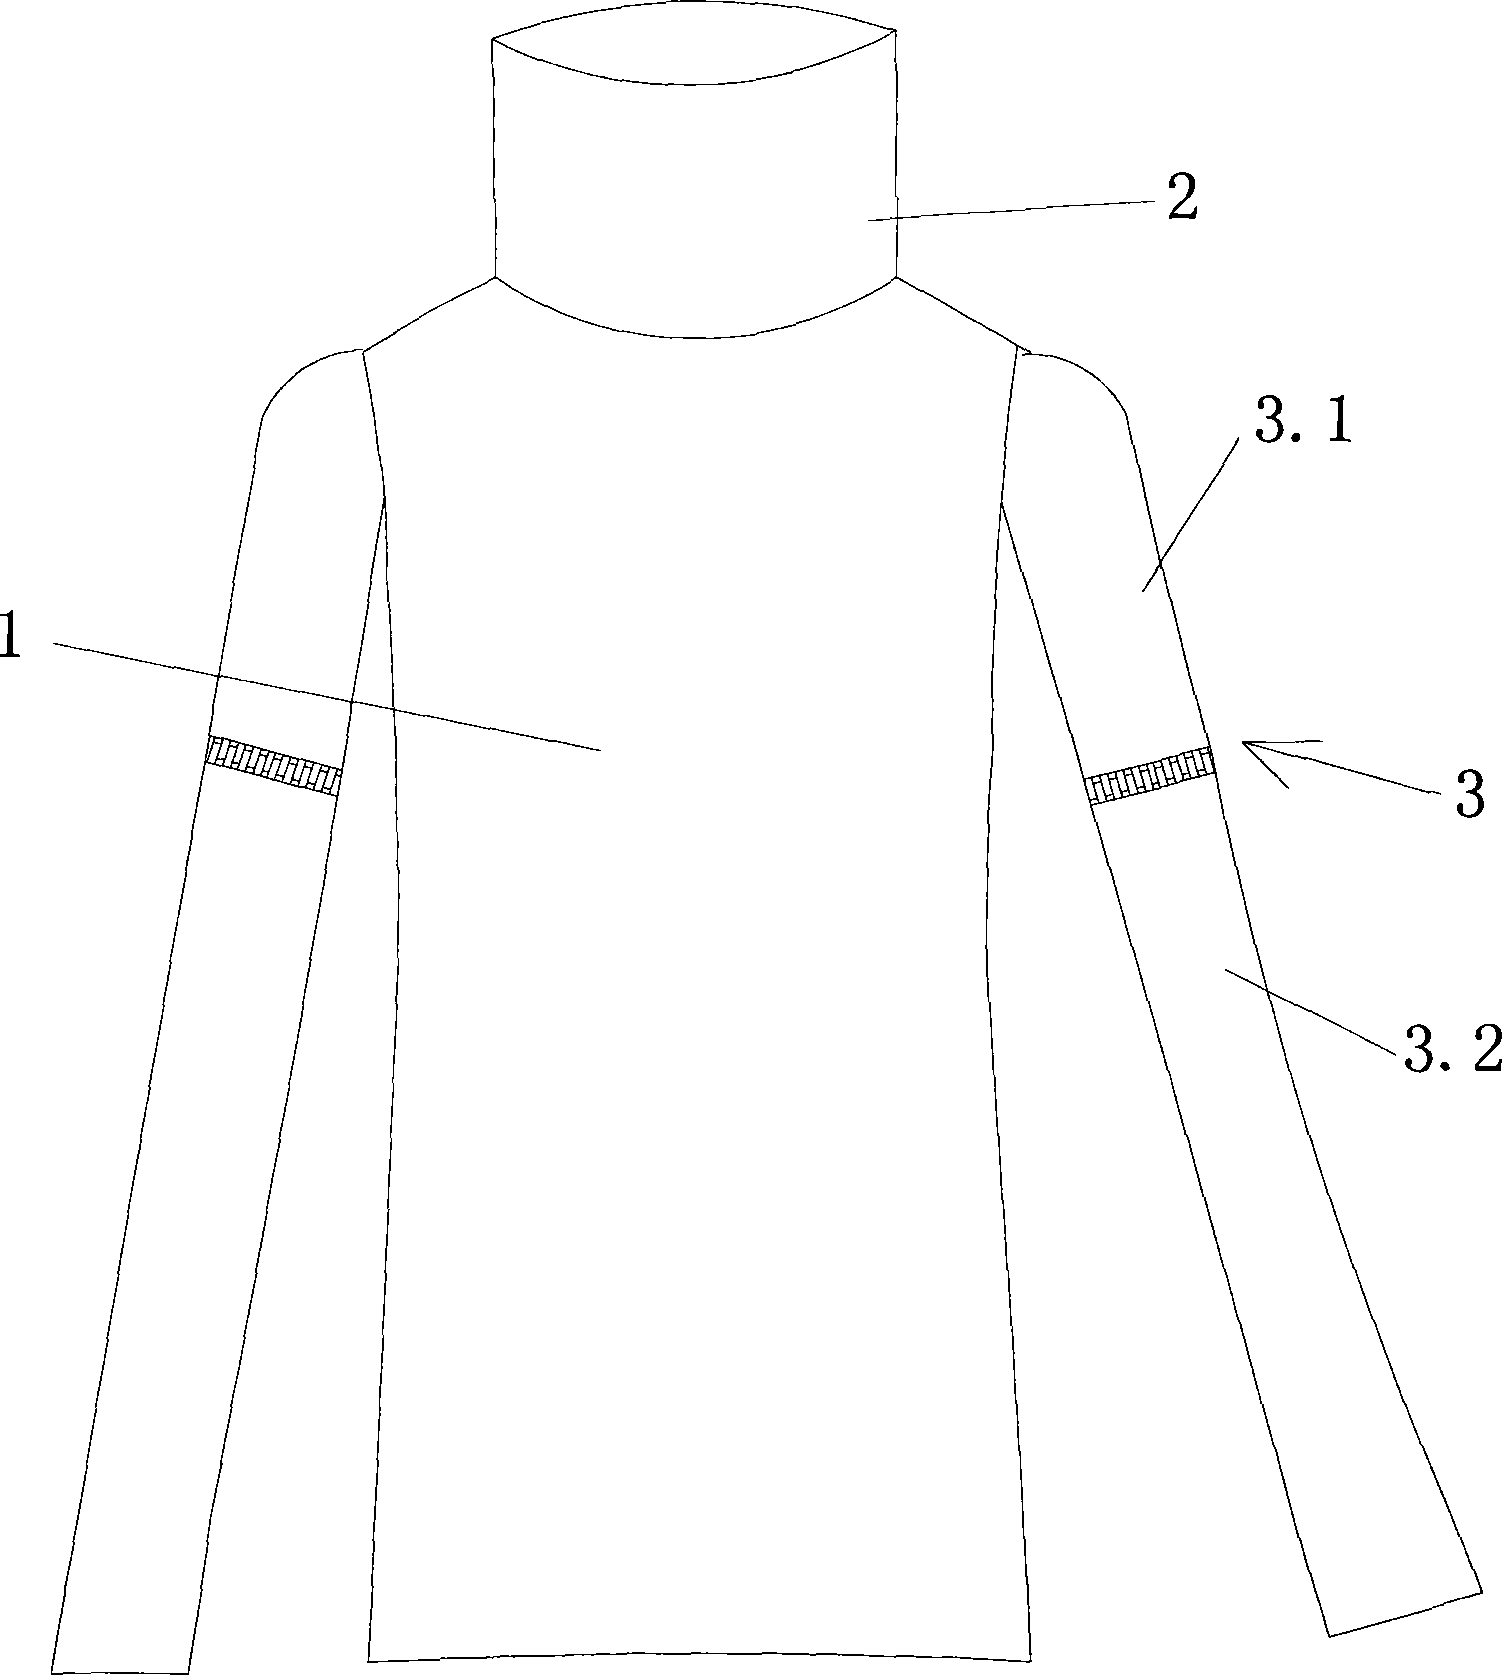 Clothes made of blackout fabric and provided with detachable sleeves